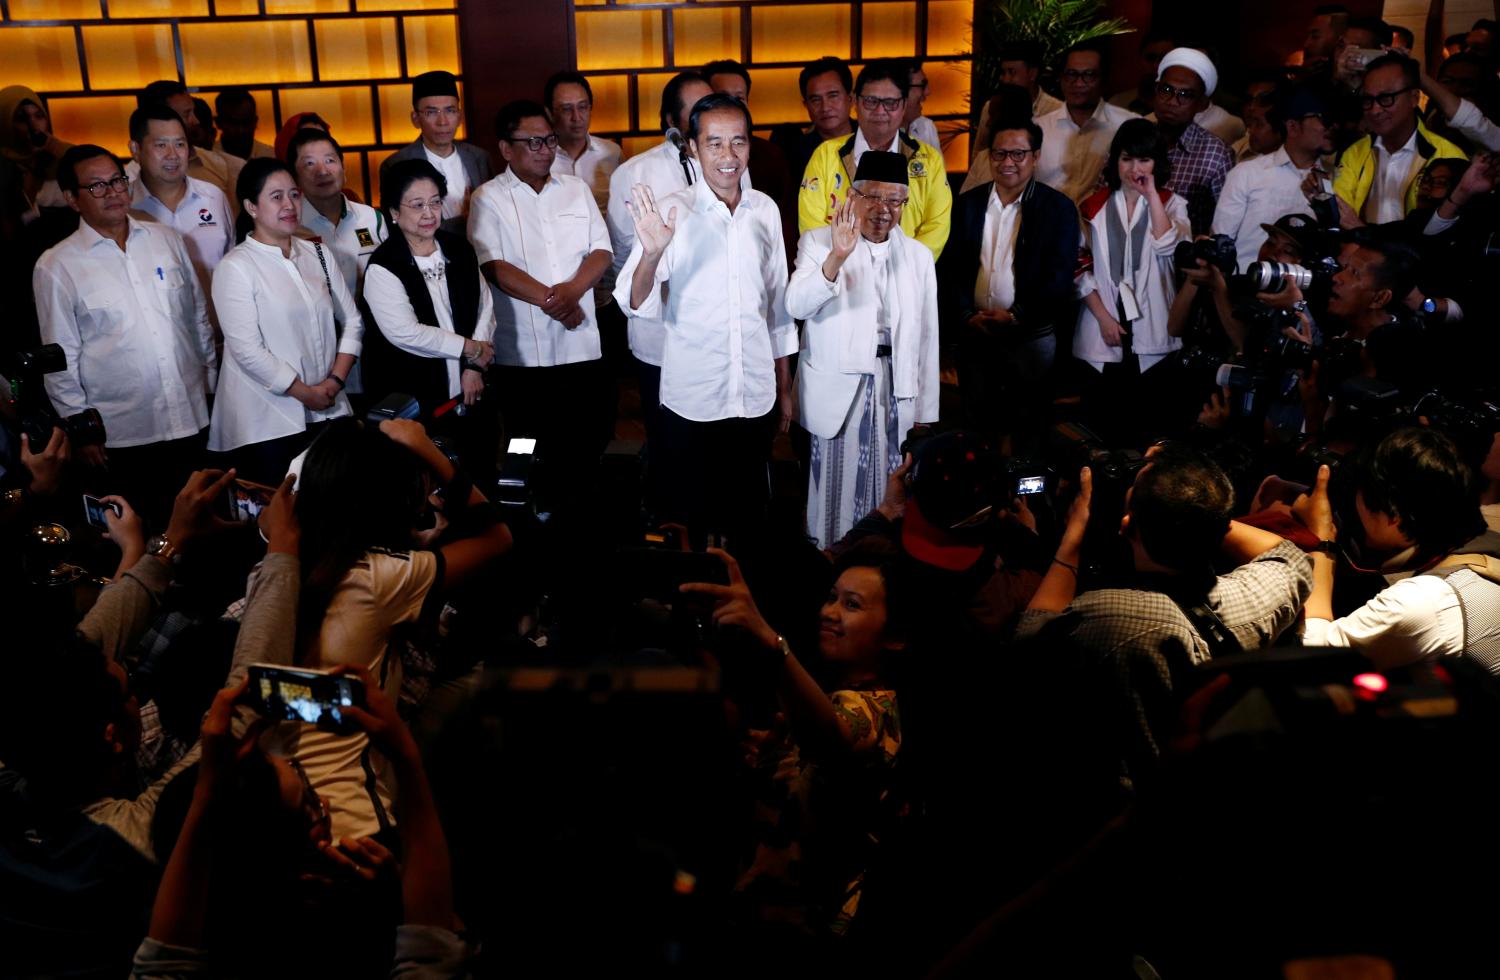 Indonesia's President Joko Widodo and his running mate Ma'ruf Amin react after a quick count result during the Indonesian elections in Jakarta, Indonesia April 17, 2019. REUTERS/Edgar Su - RC19421D72E0